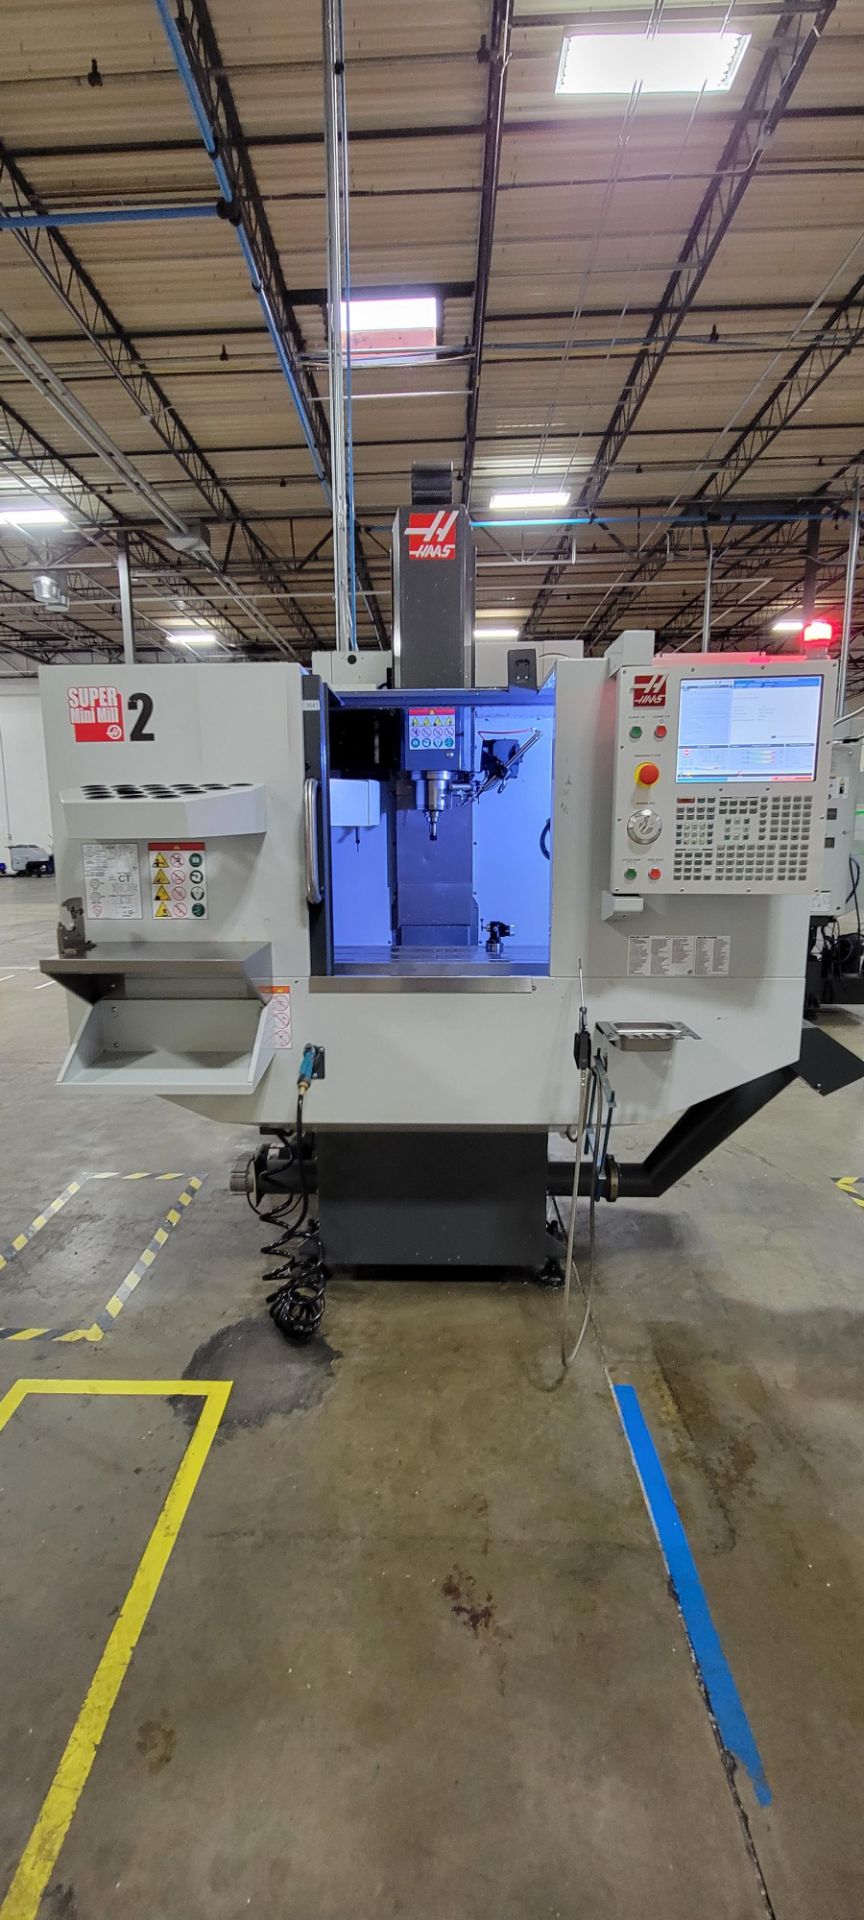 Haas Super Mini Mill 2 3-Axis CNC Vertical Machining Center - Image 2 of 14